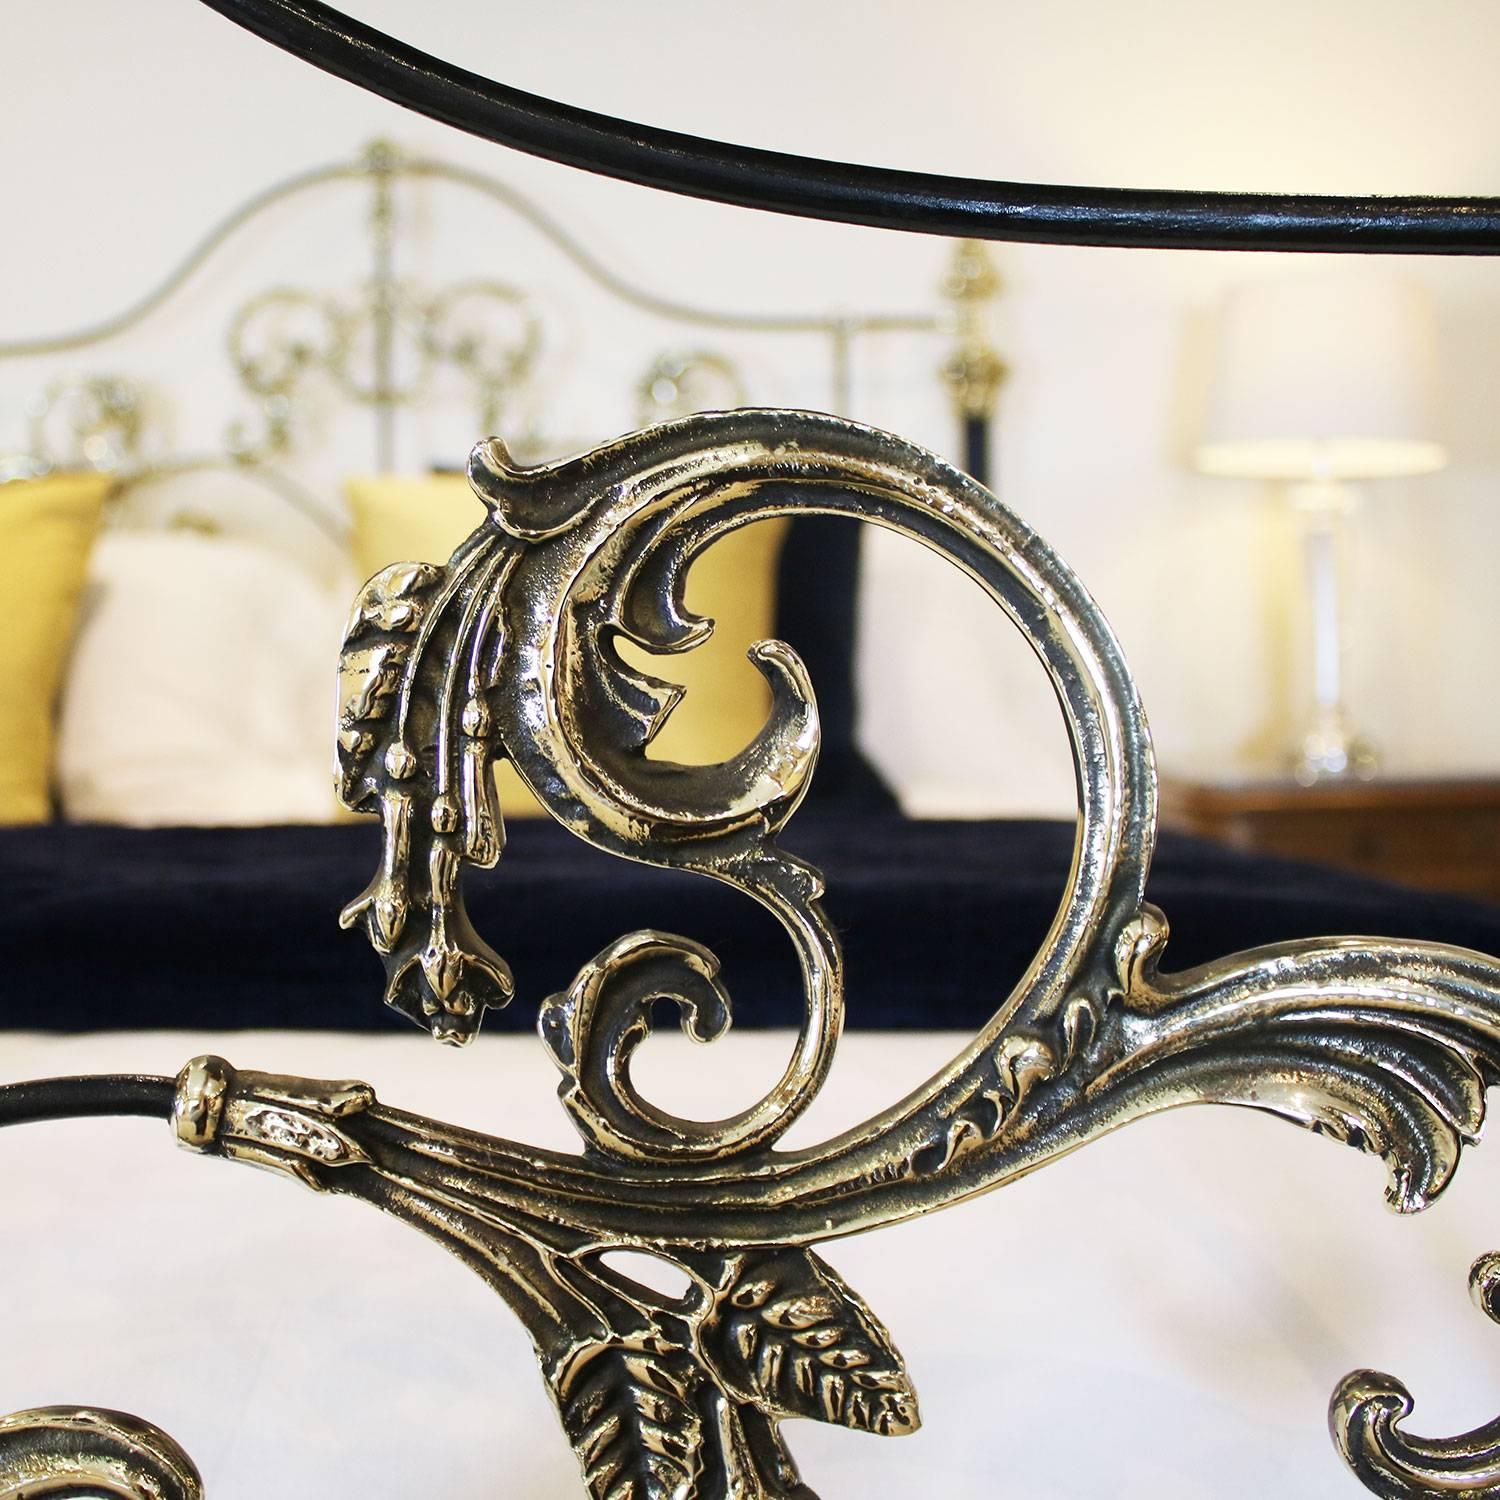 Cast Bespoke Brass and Iron Tangier Bed - Tangier 1